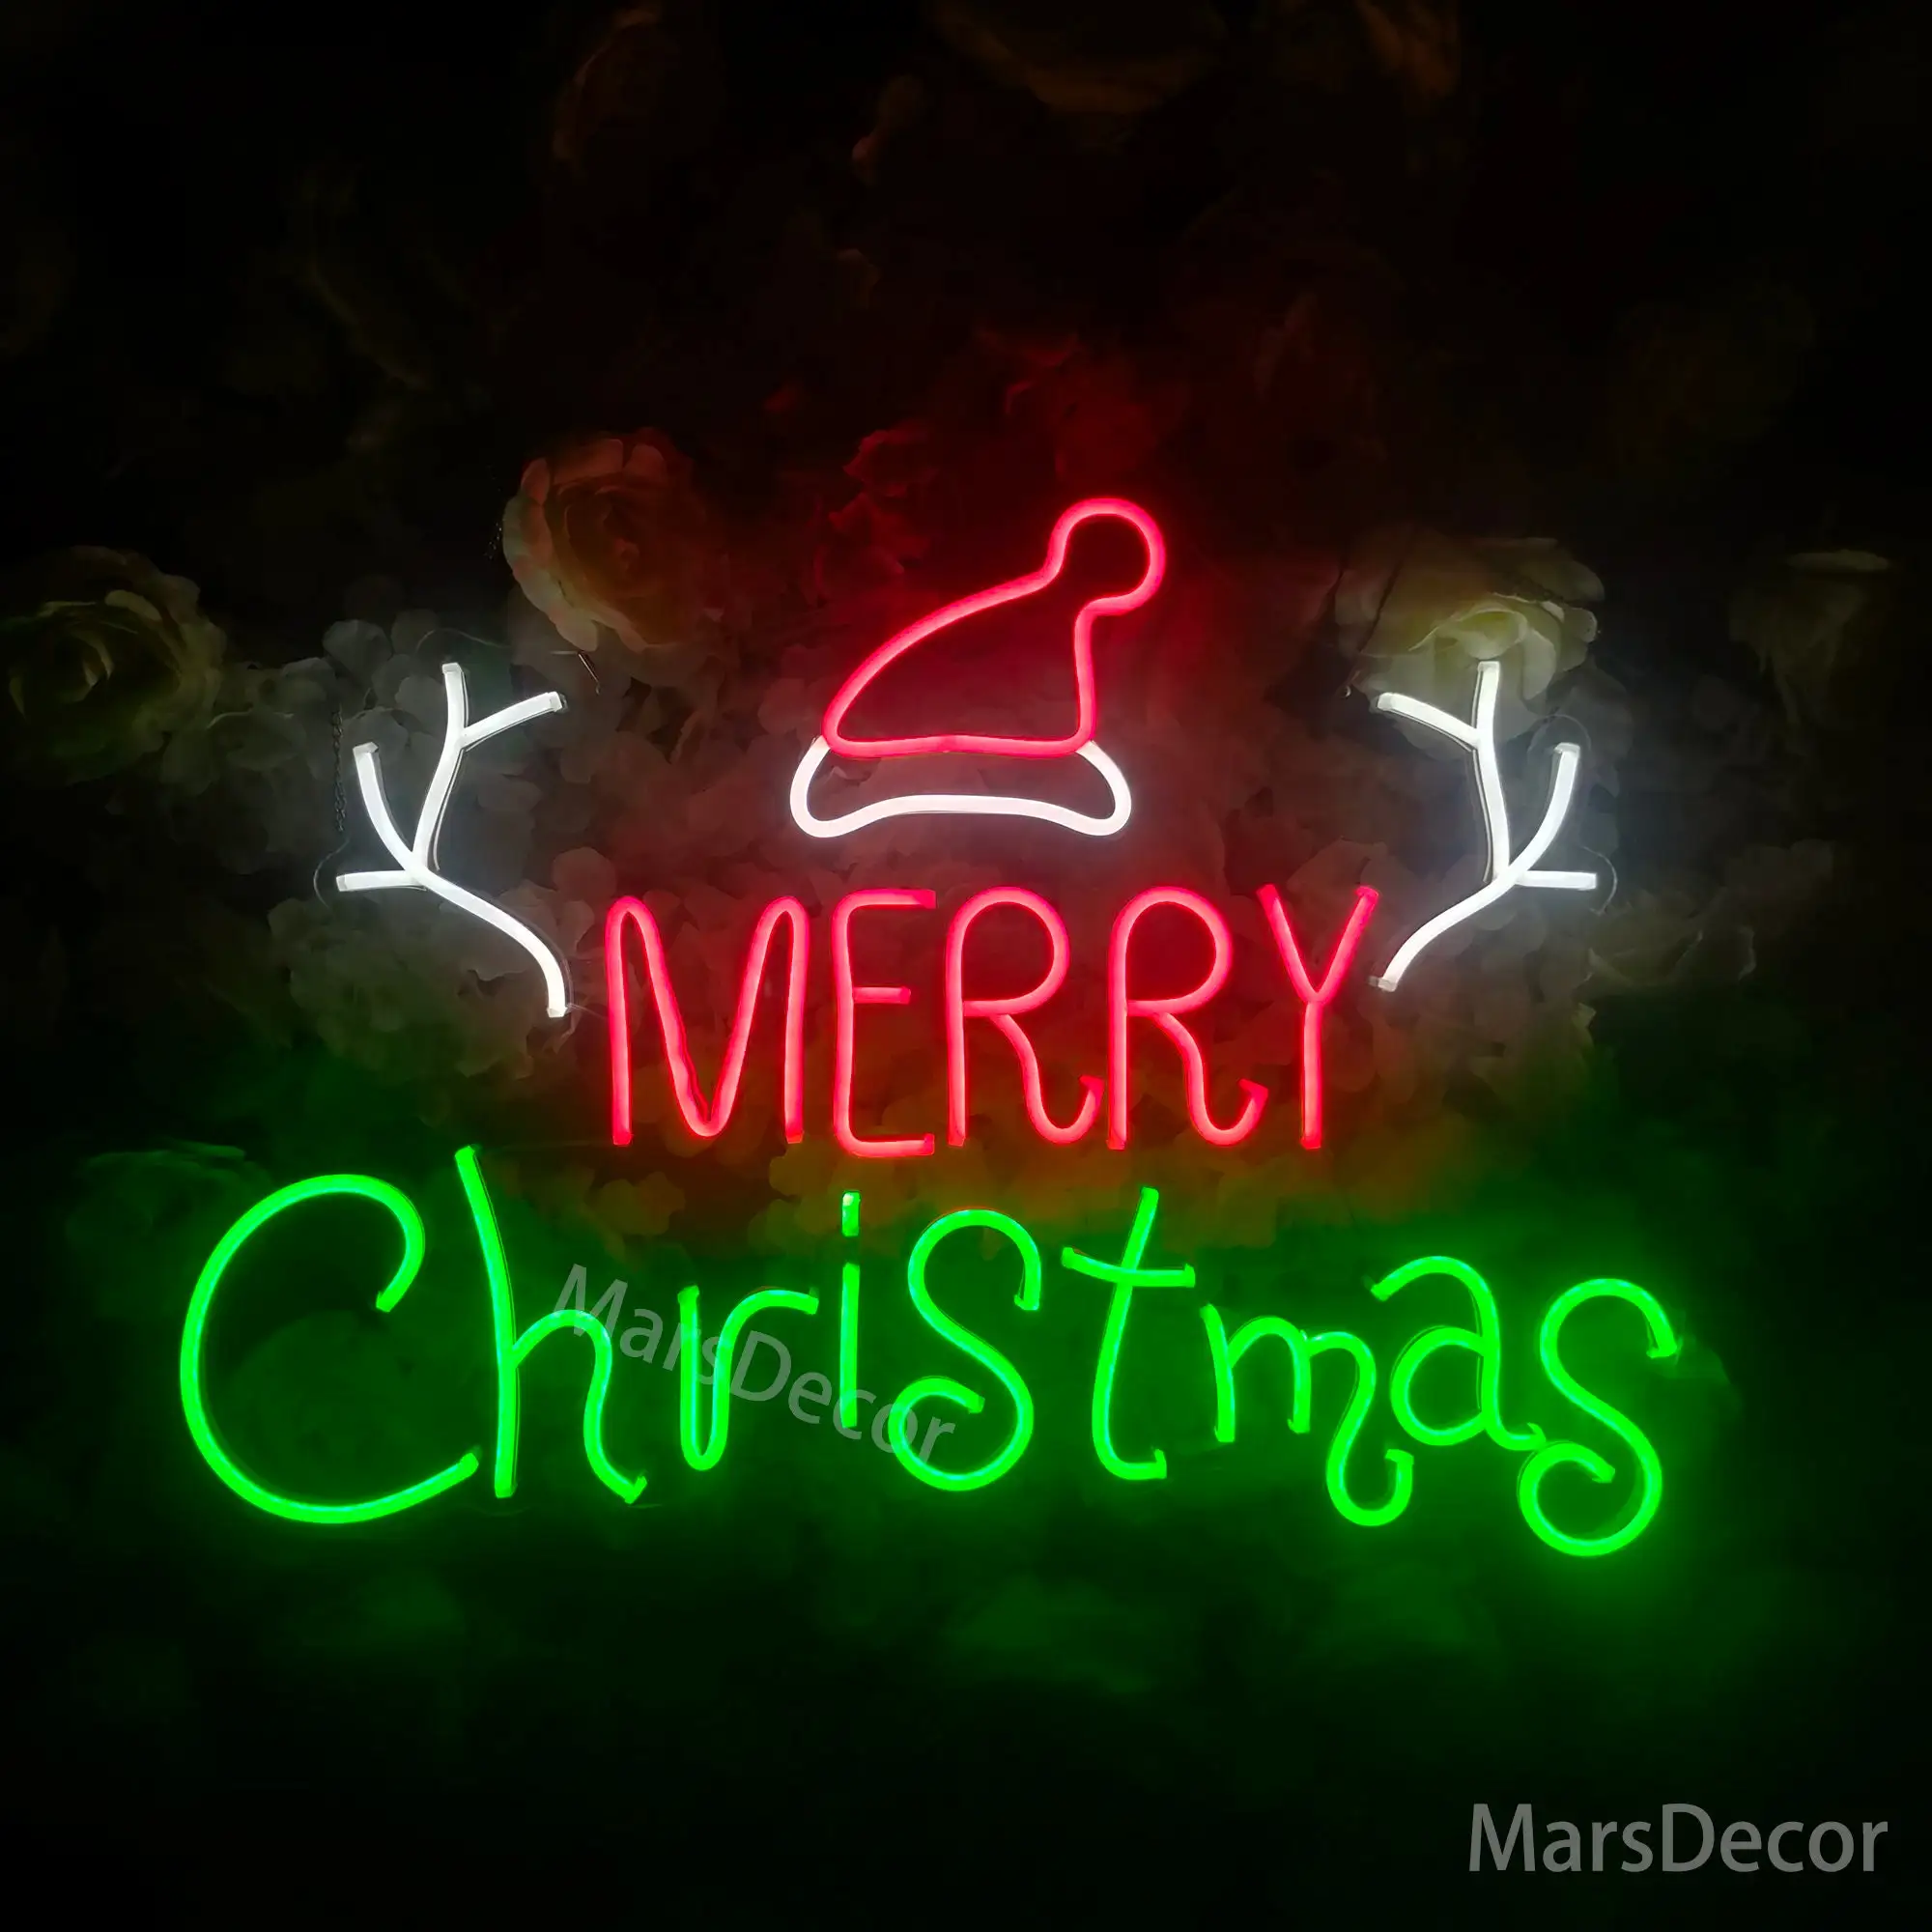 Led Merry Christmas Neon Signs for Bedroom War Decor 12V Christmas Neon Light Sign for Party Christmas Decor Gift